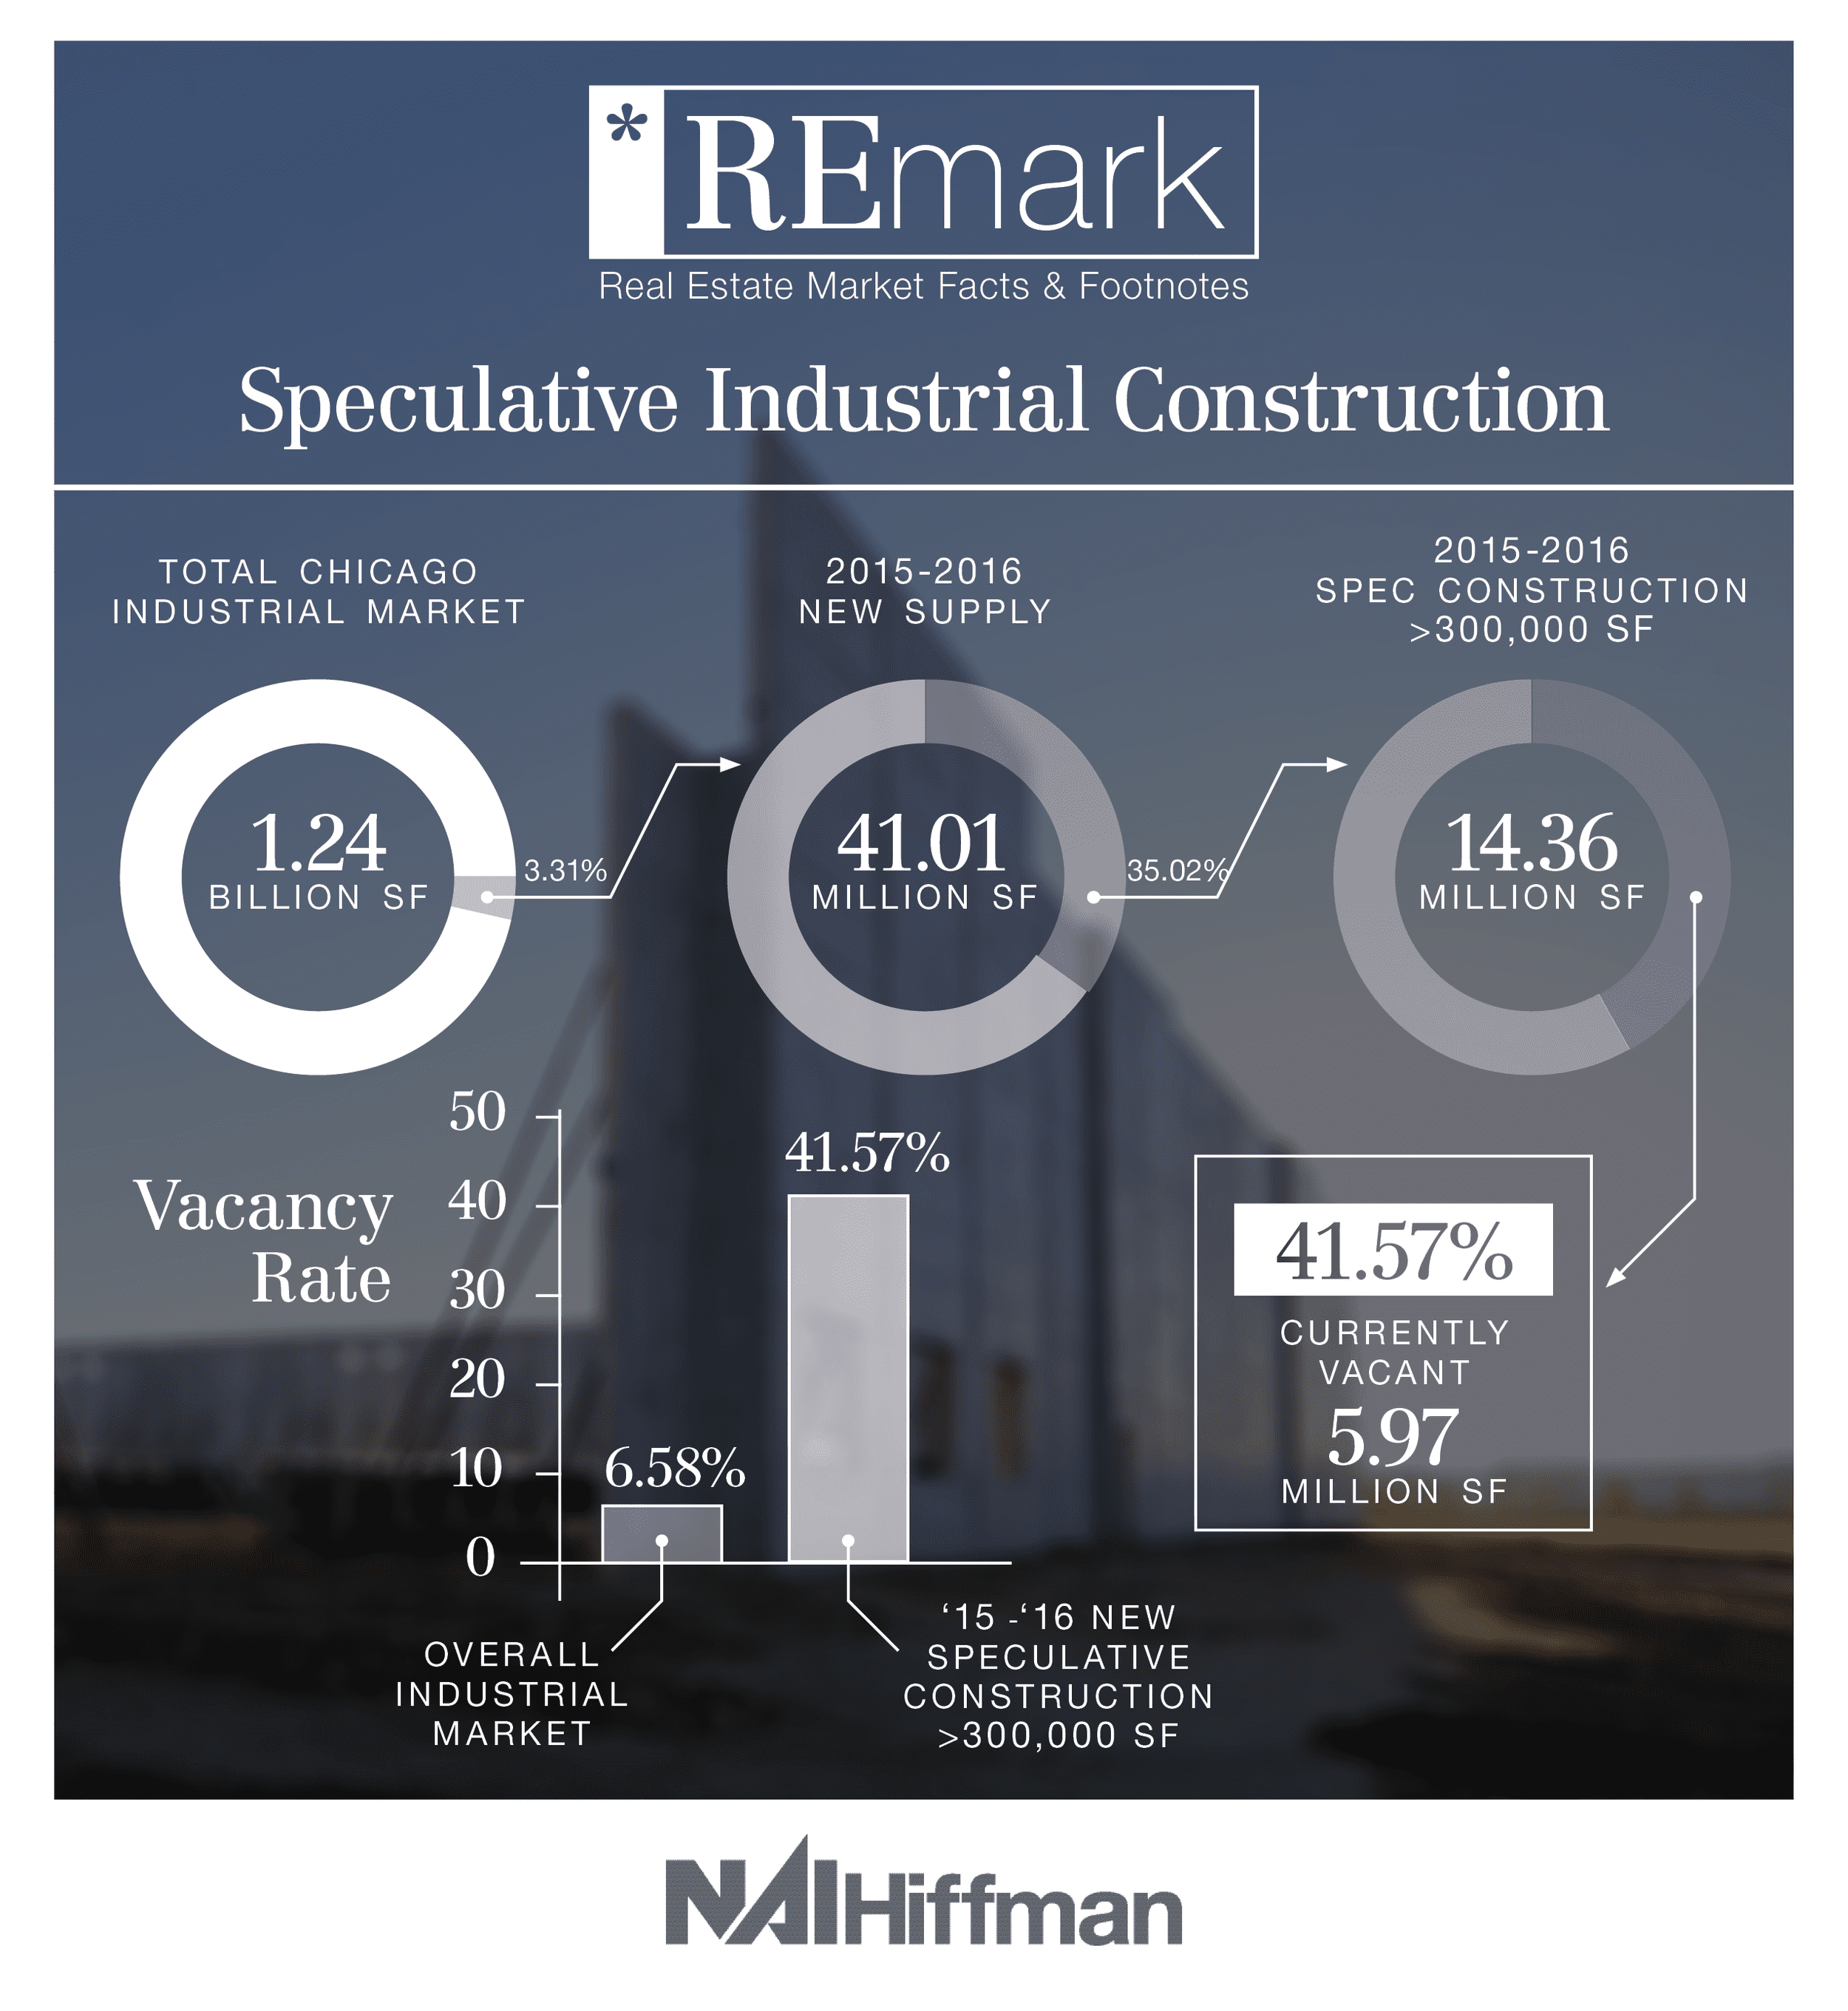 REmark: Speculative Industrial Construction